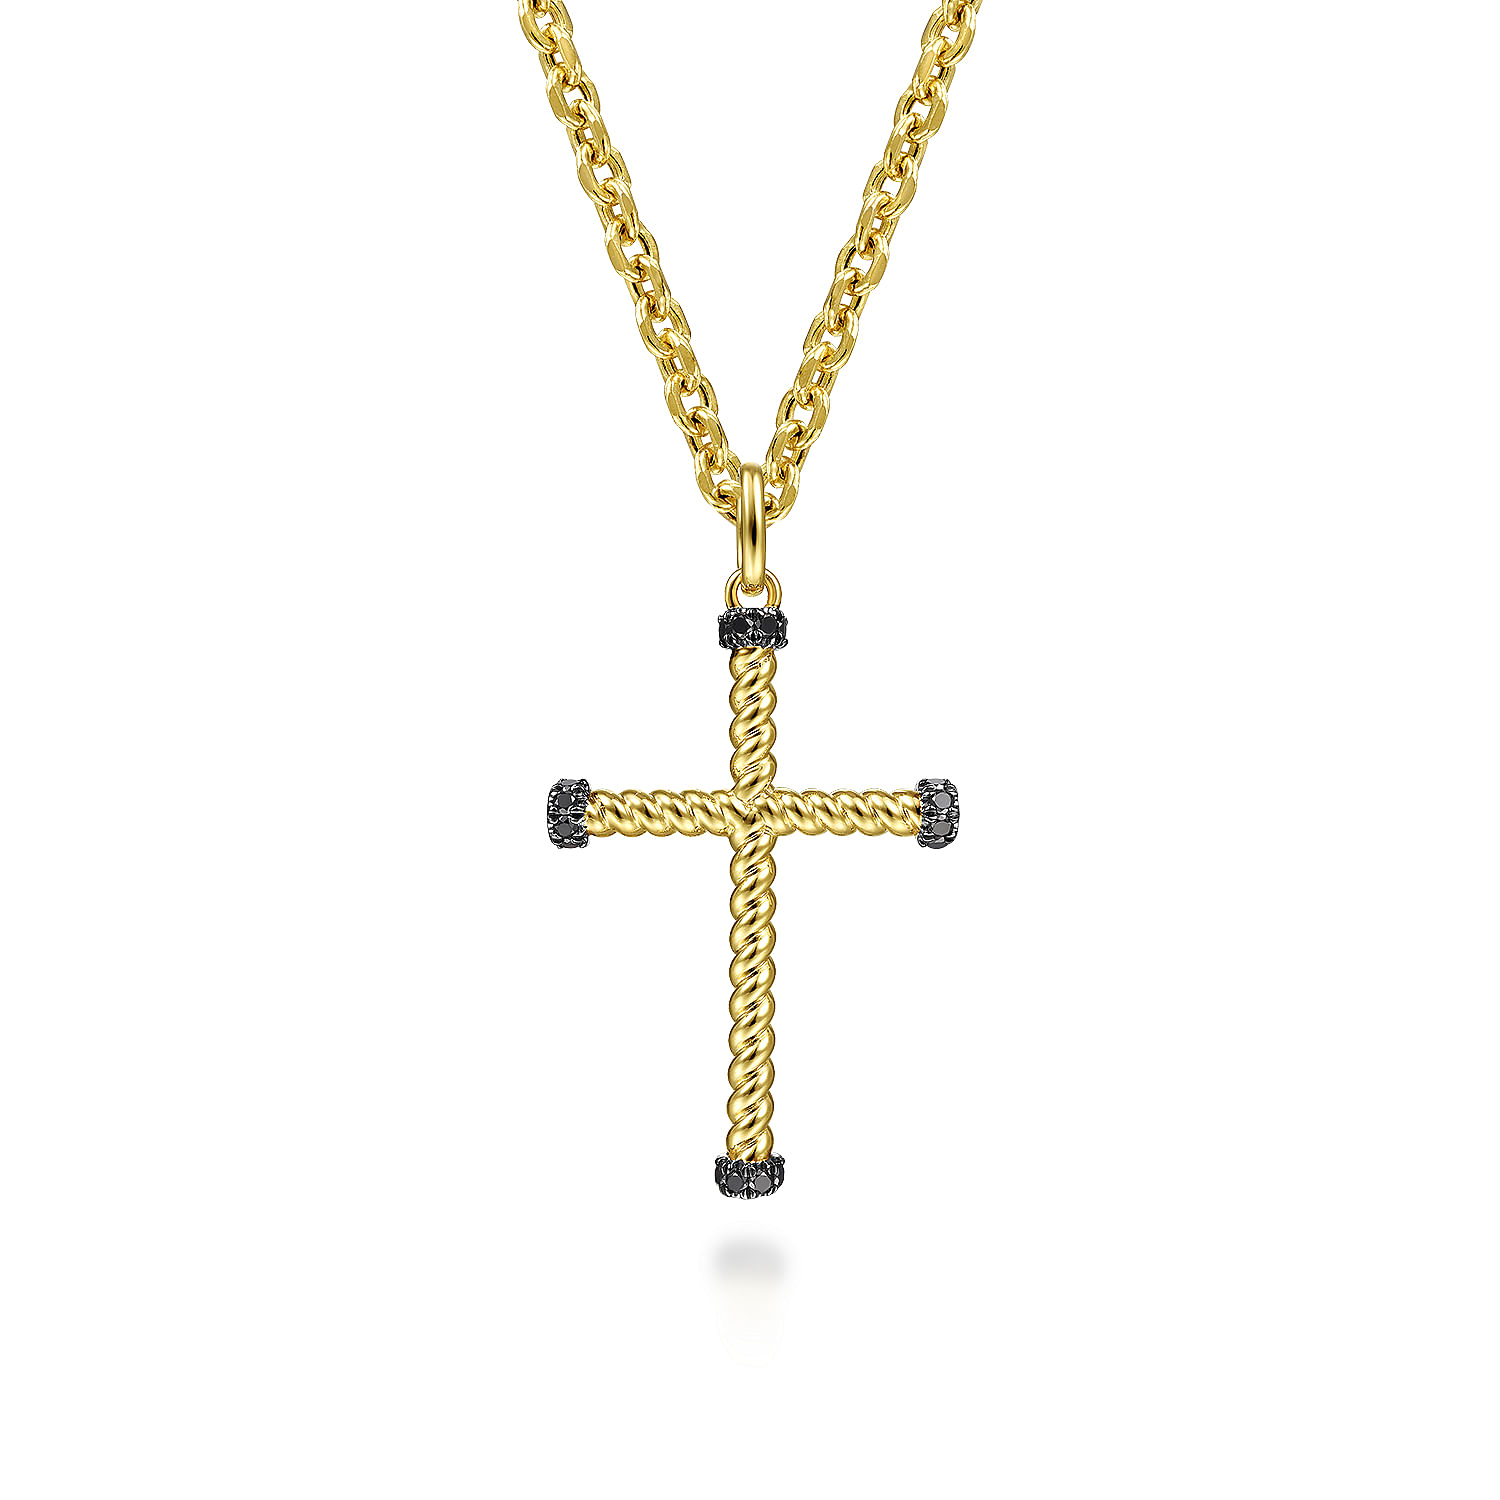 14K Yellow Gold Twisted Rope Cross Pendant with Black Diamonds